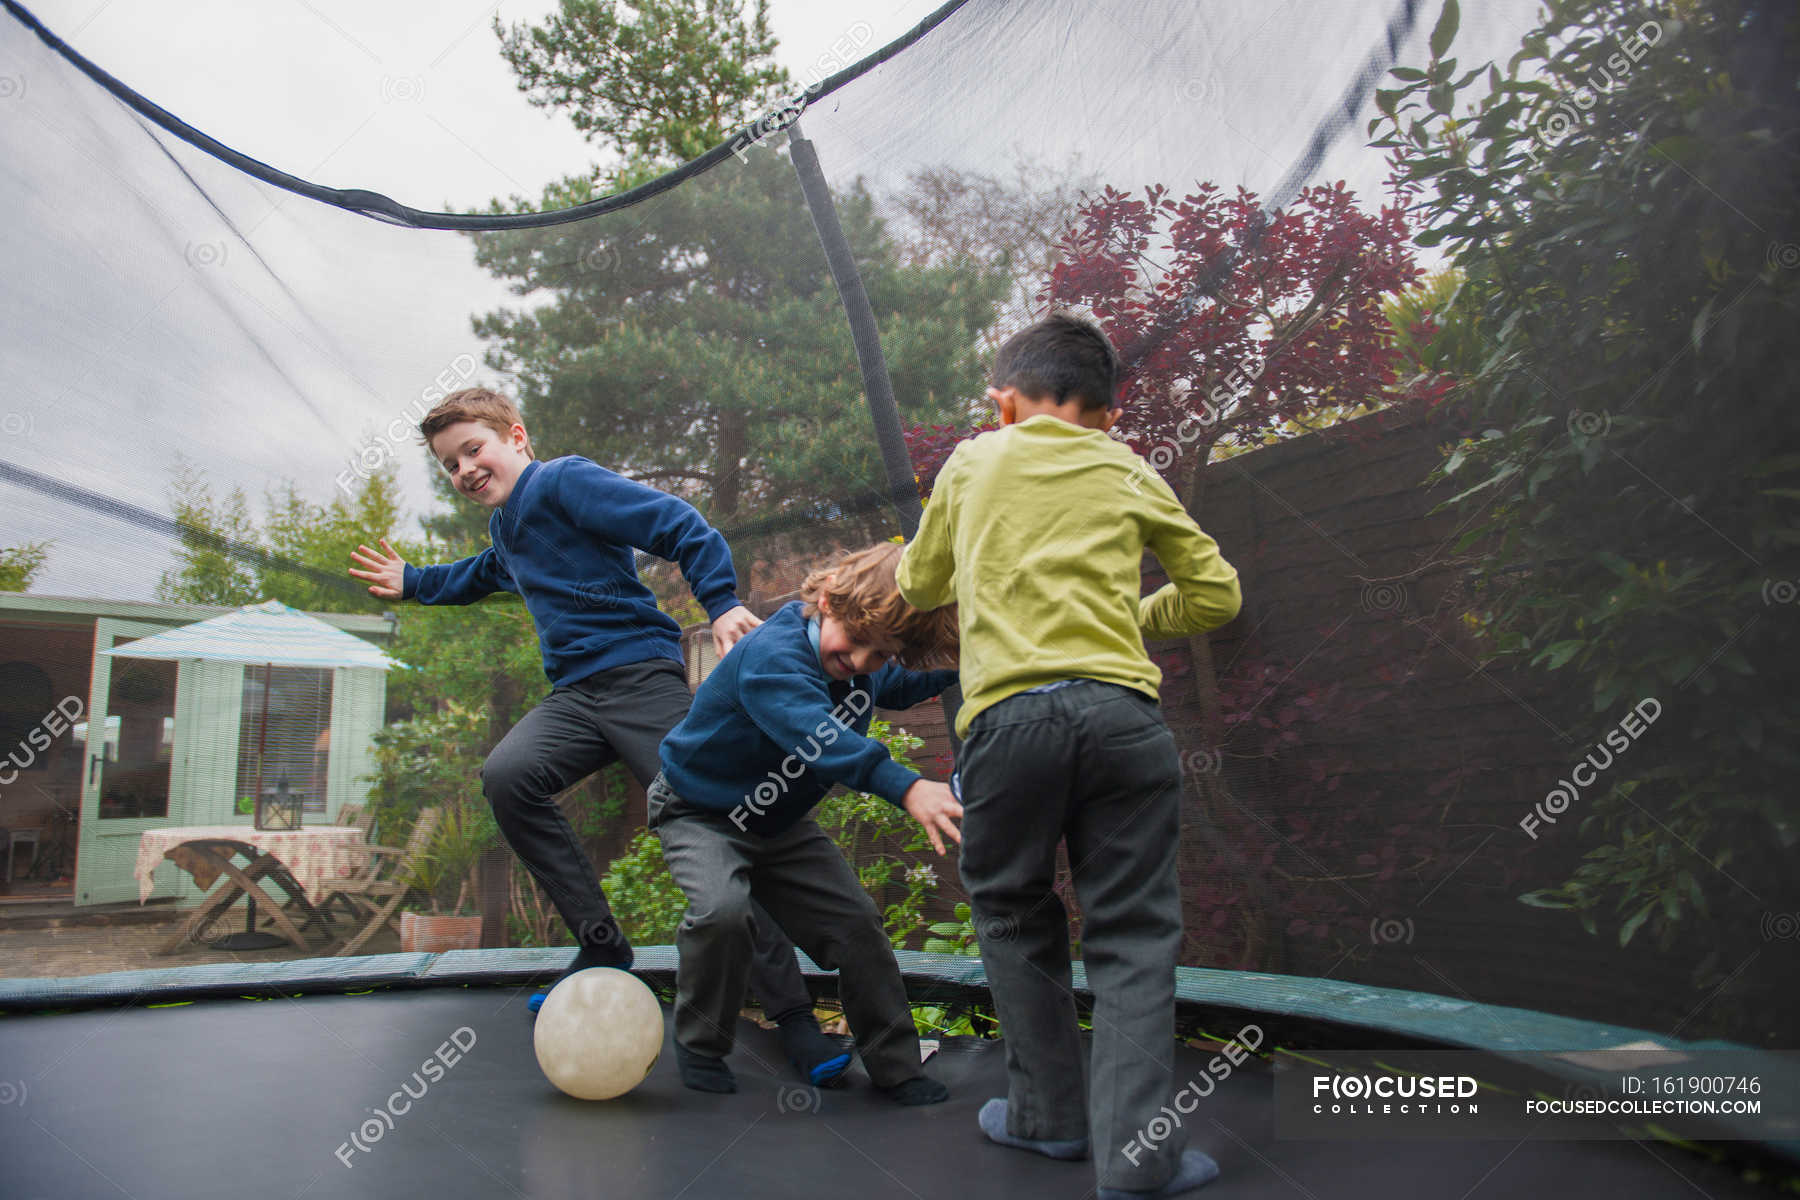 Boys trampoline playing football — happiness, outdoors - Stock | #161900746